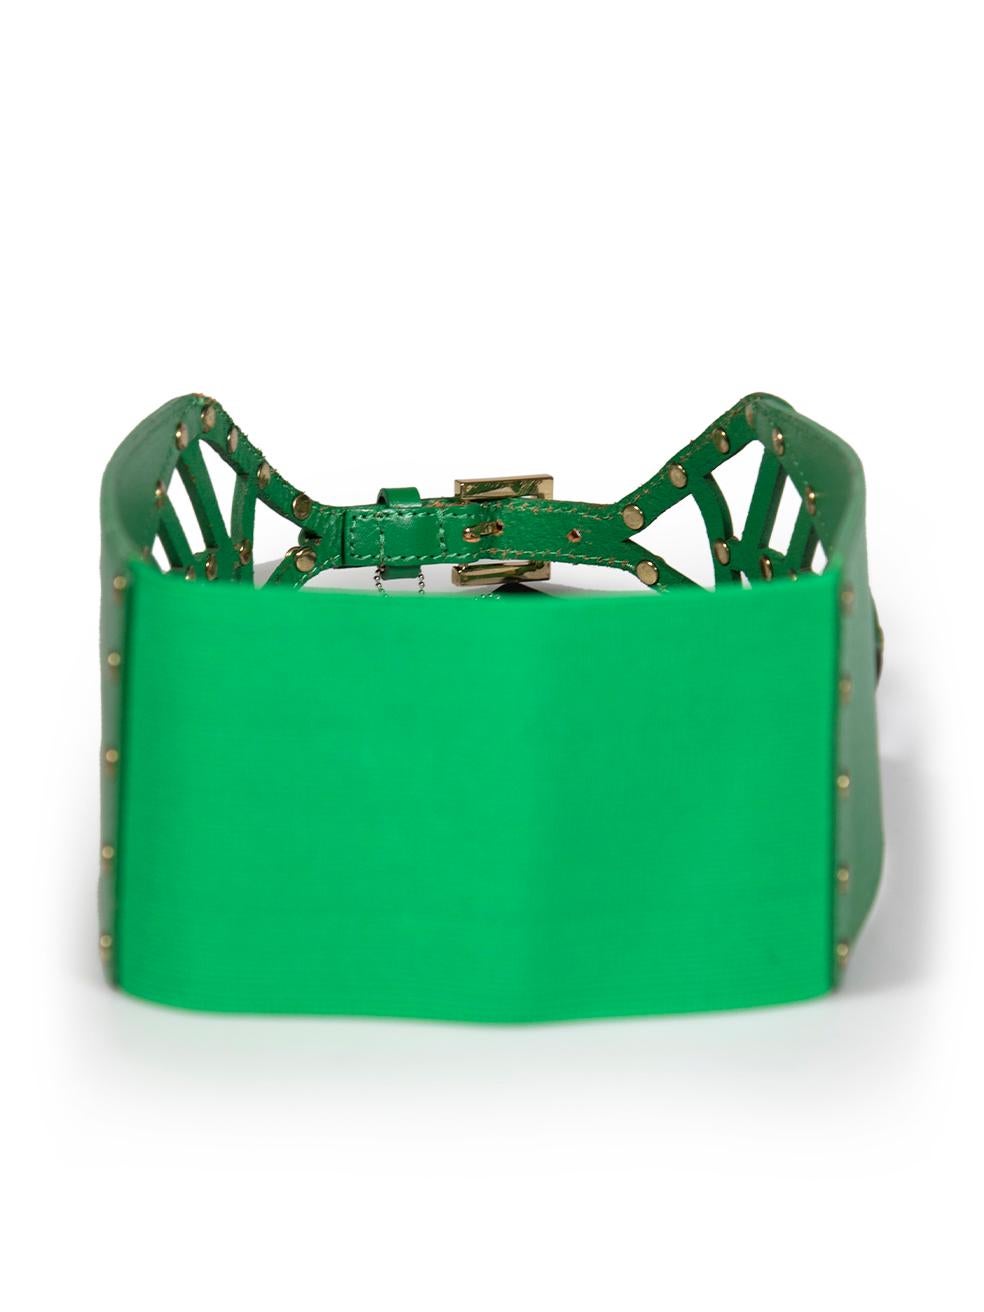 Roberto Cavalli Green Leather Studded Leaf Wide Belt In New Condition For Sale In London, GB